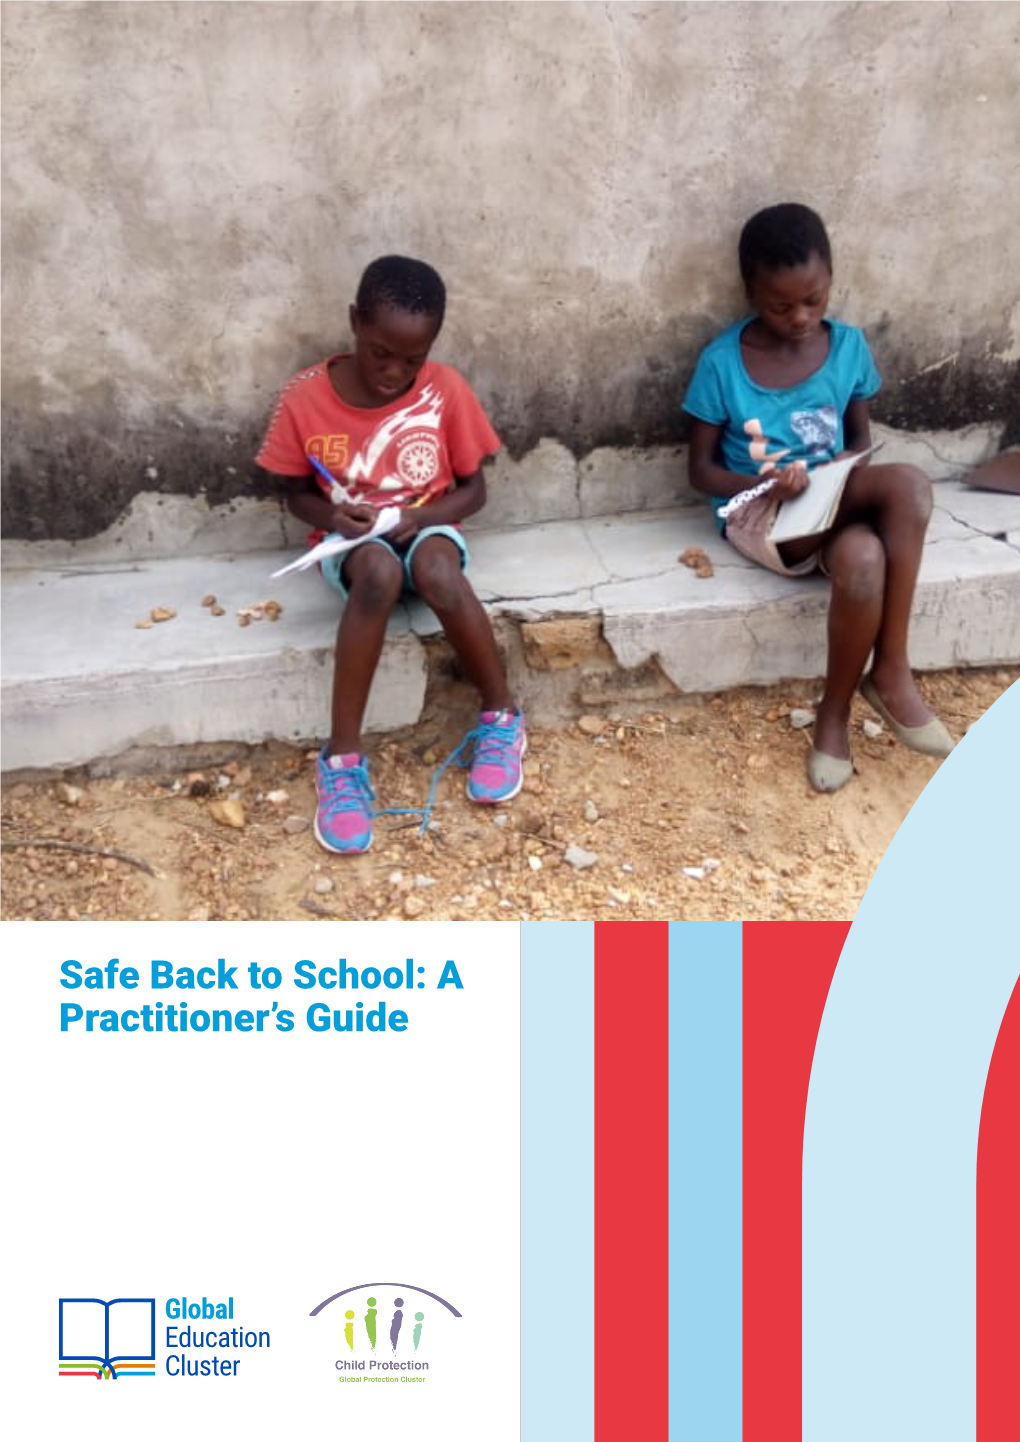 Safe Back to School: a Practitioner's Guide